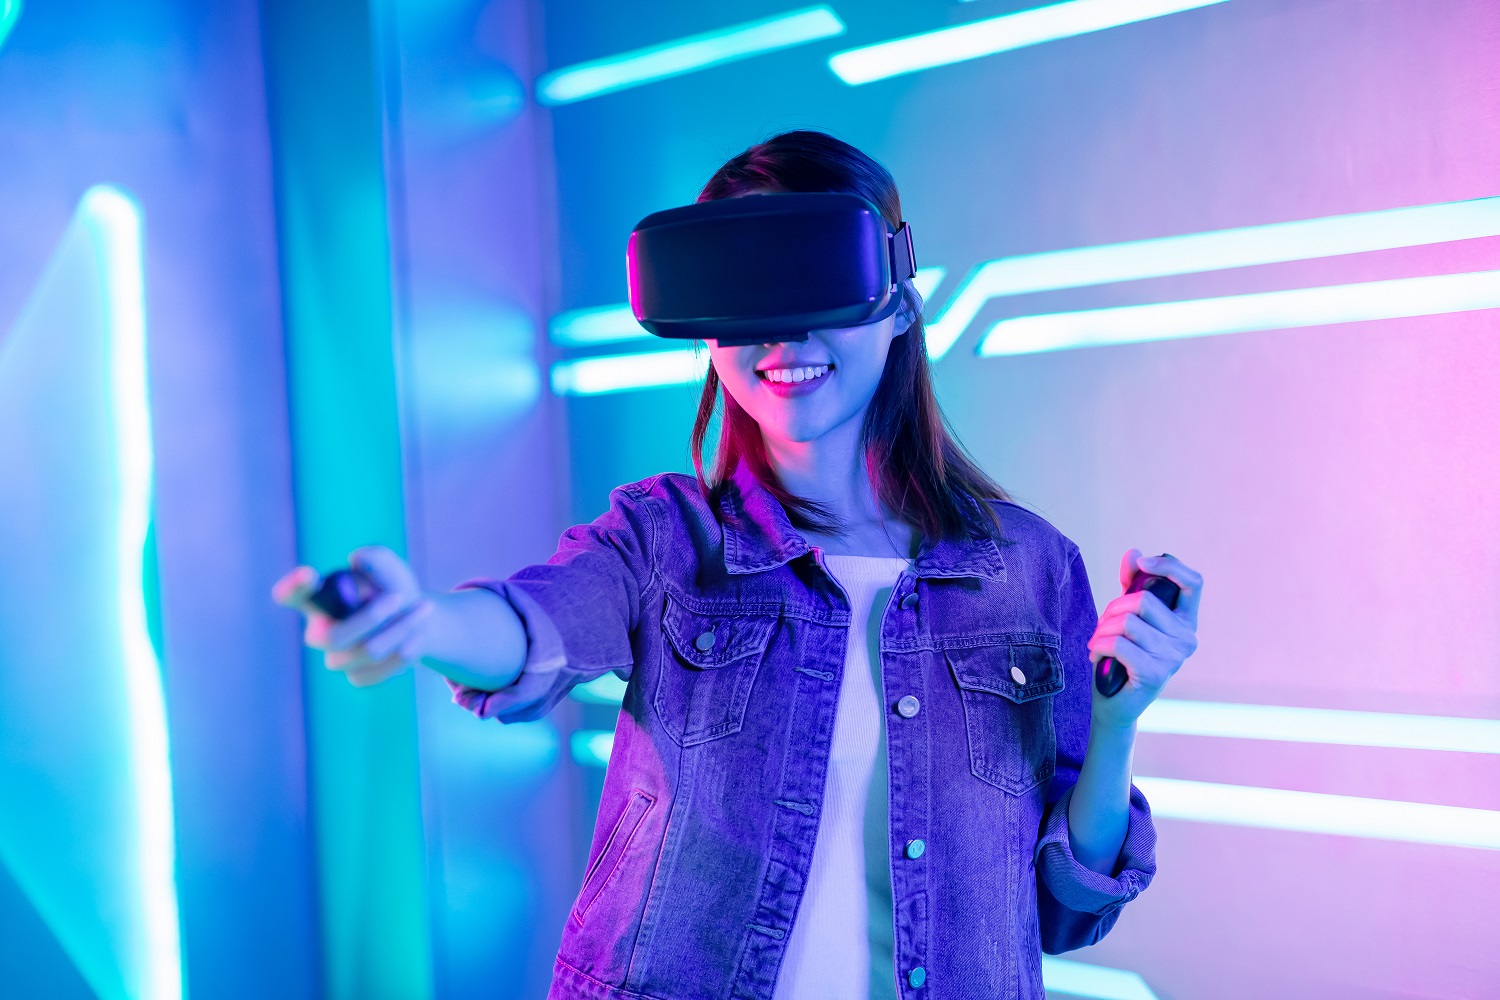 Person wearing VR headset plays a game with nunchucks in hand. They wear a denim jacket and stand in a blue and pink neon-lit room.